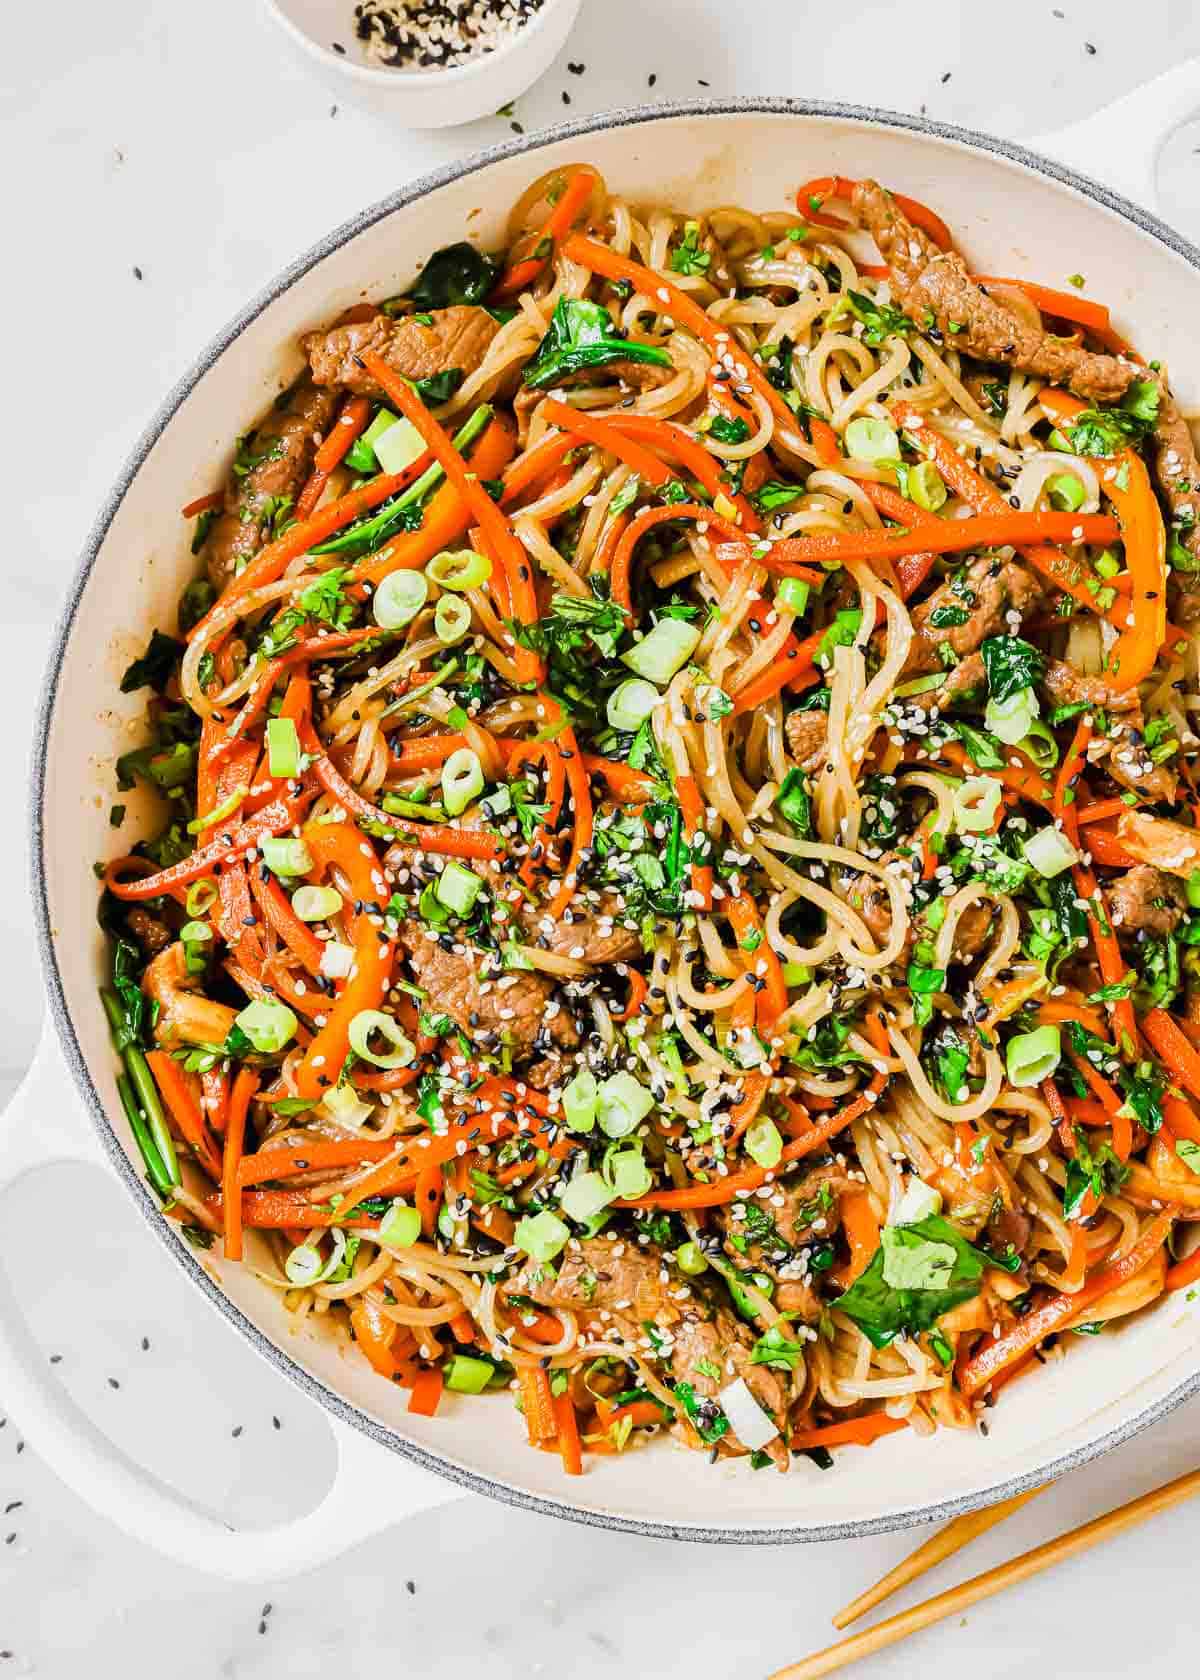 A skillet full of Korean sweet potato noodles and vegetables with chopsticks.